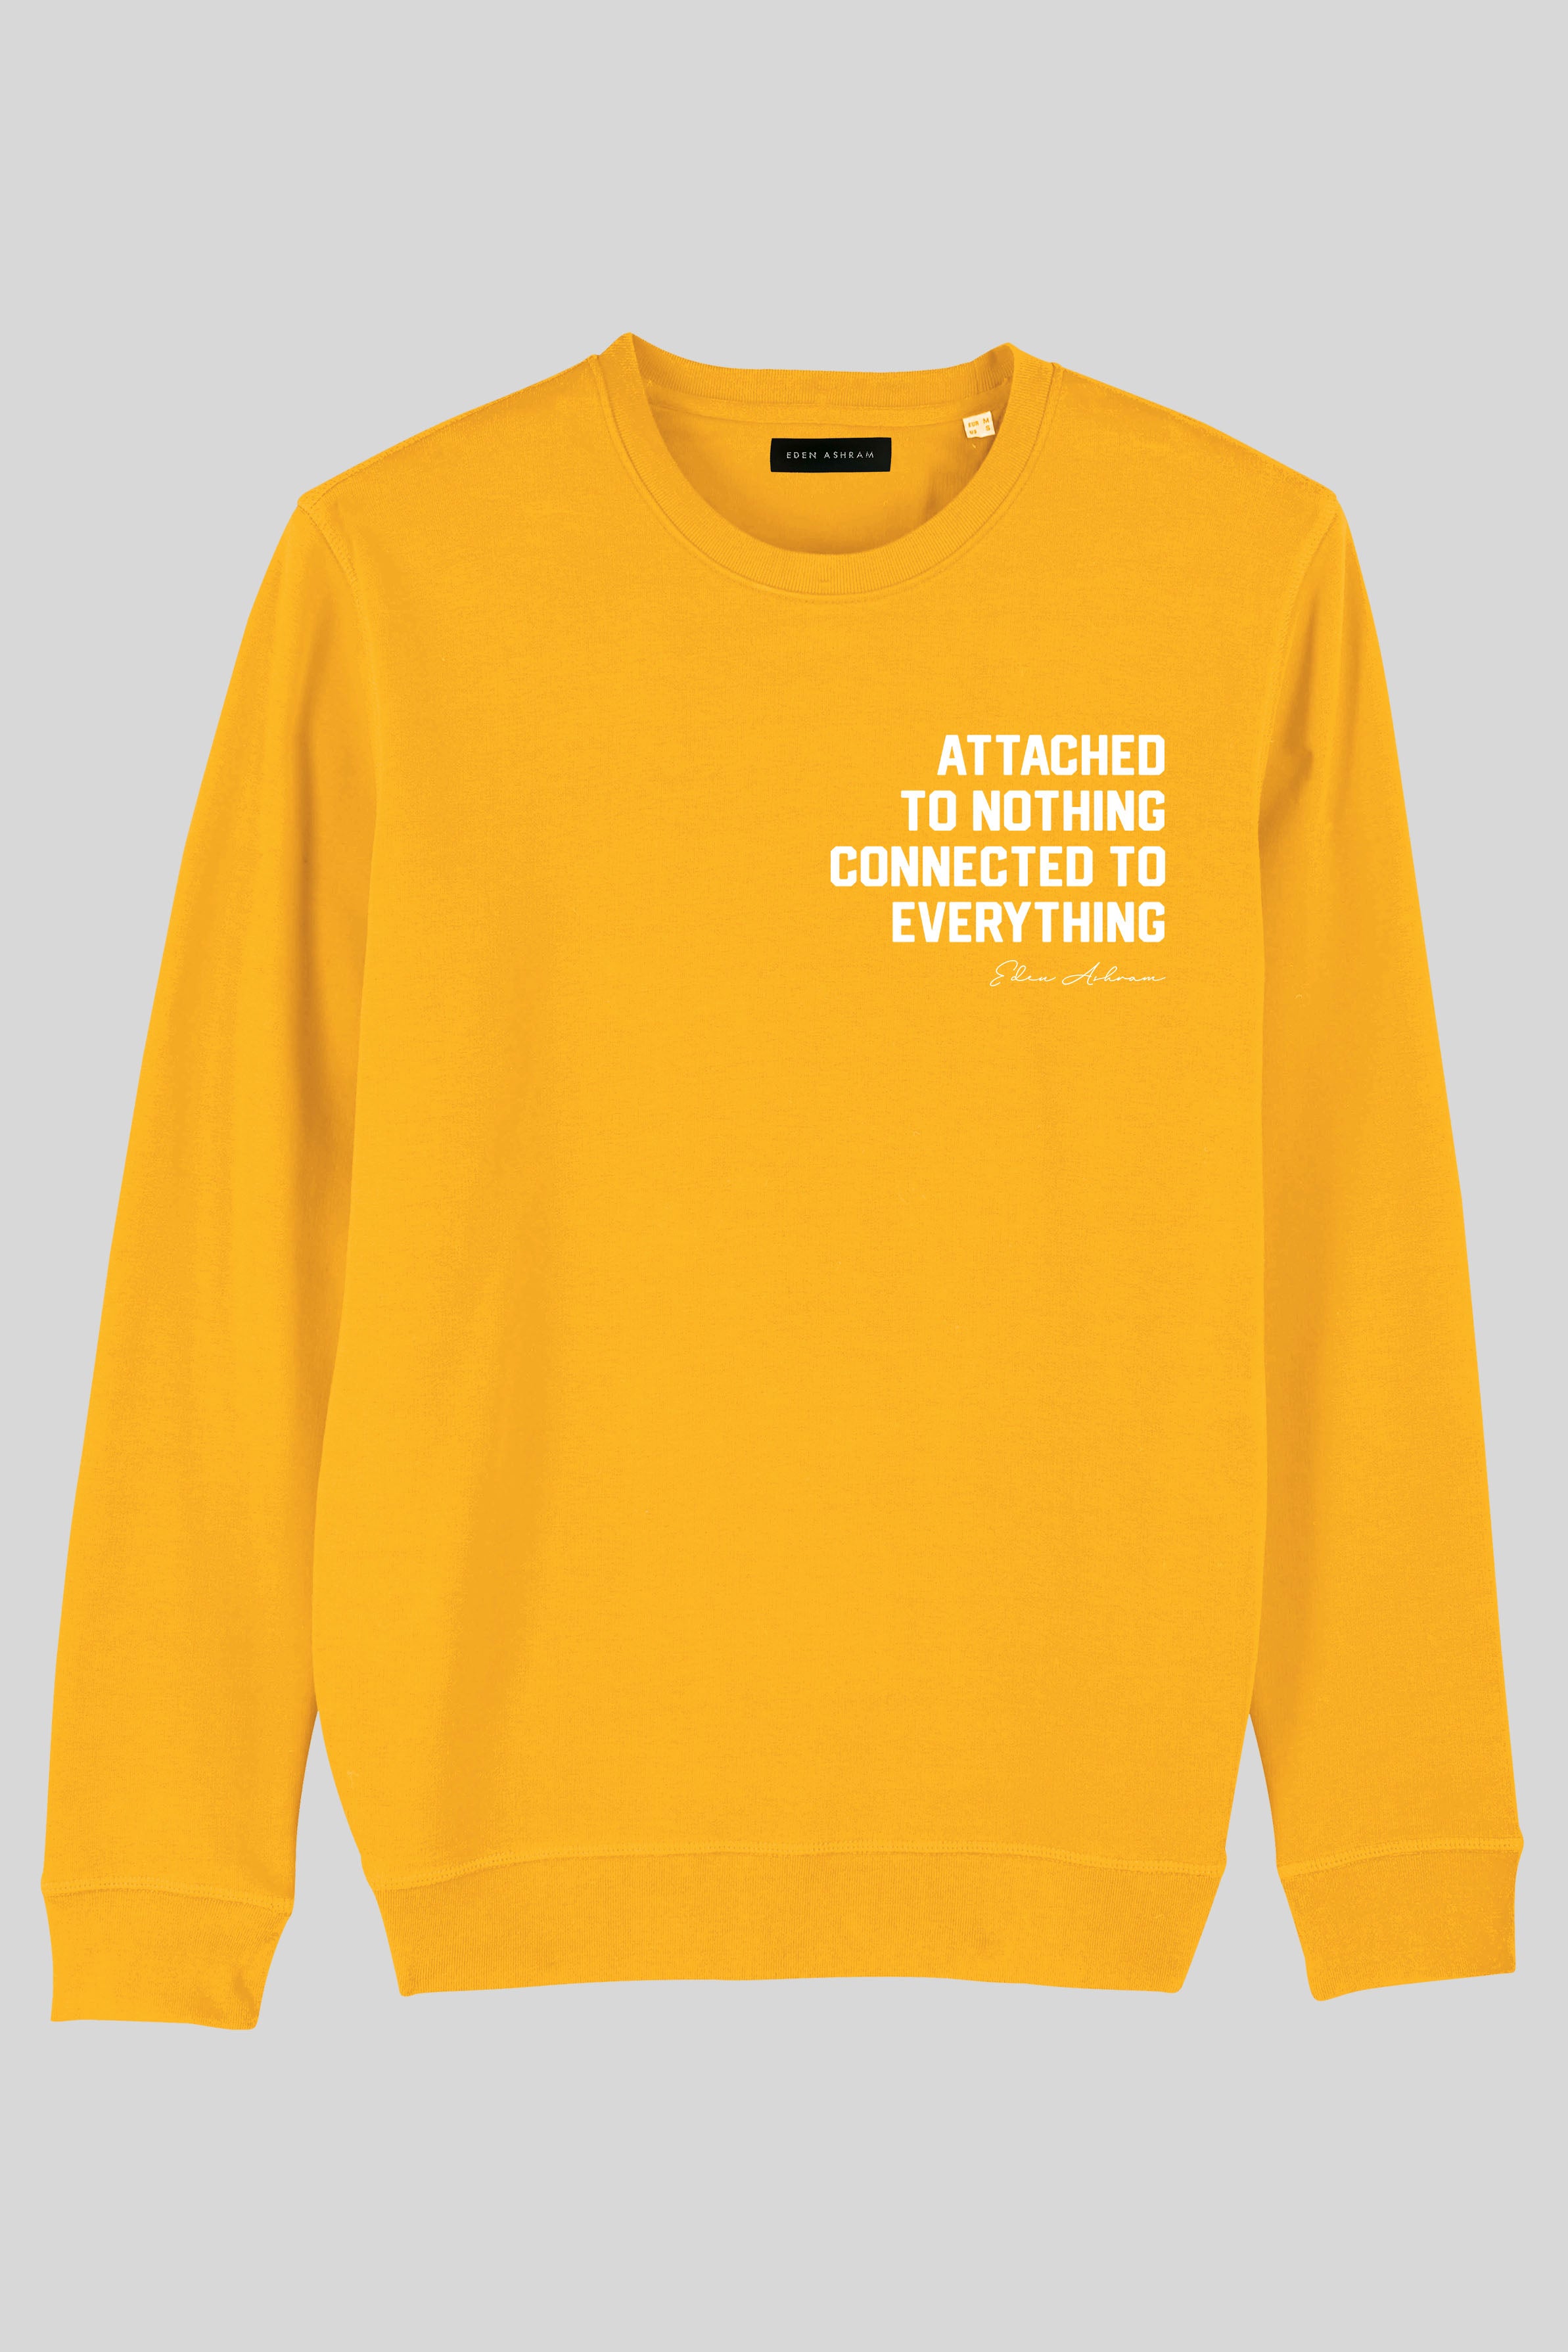 Eden Ashram Attached To Nothing Connected To Everything Premium Crew Neck Sweatshirt Spectra Yellow